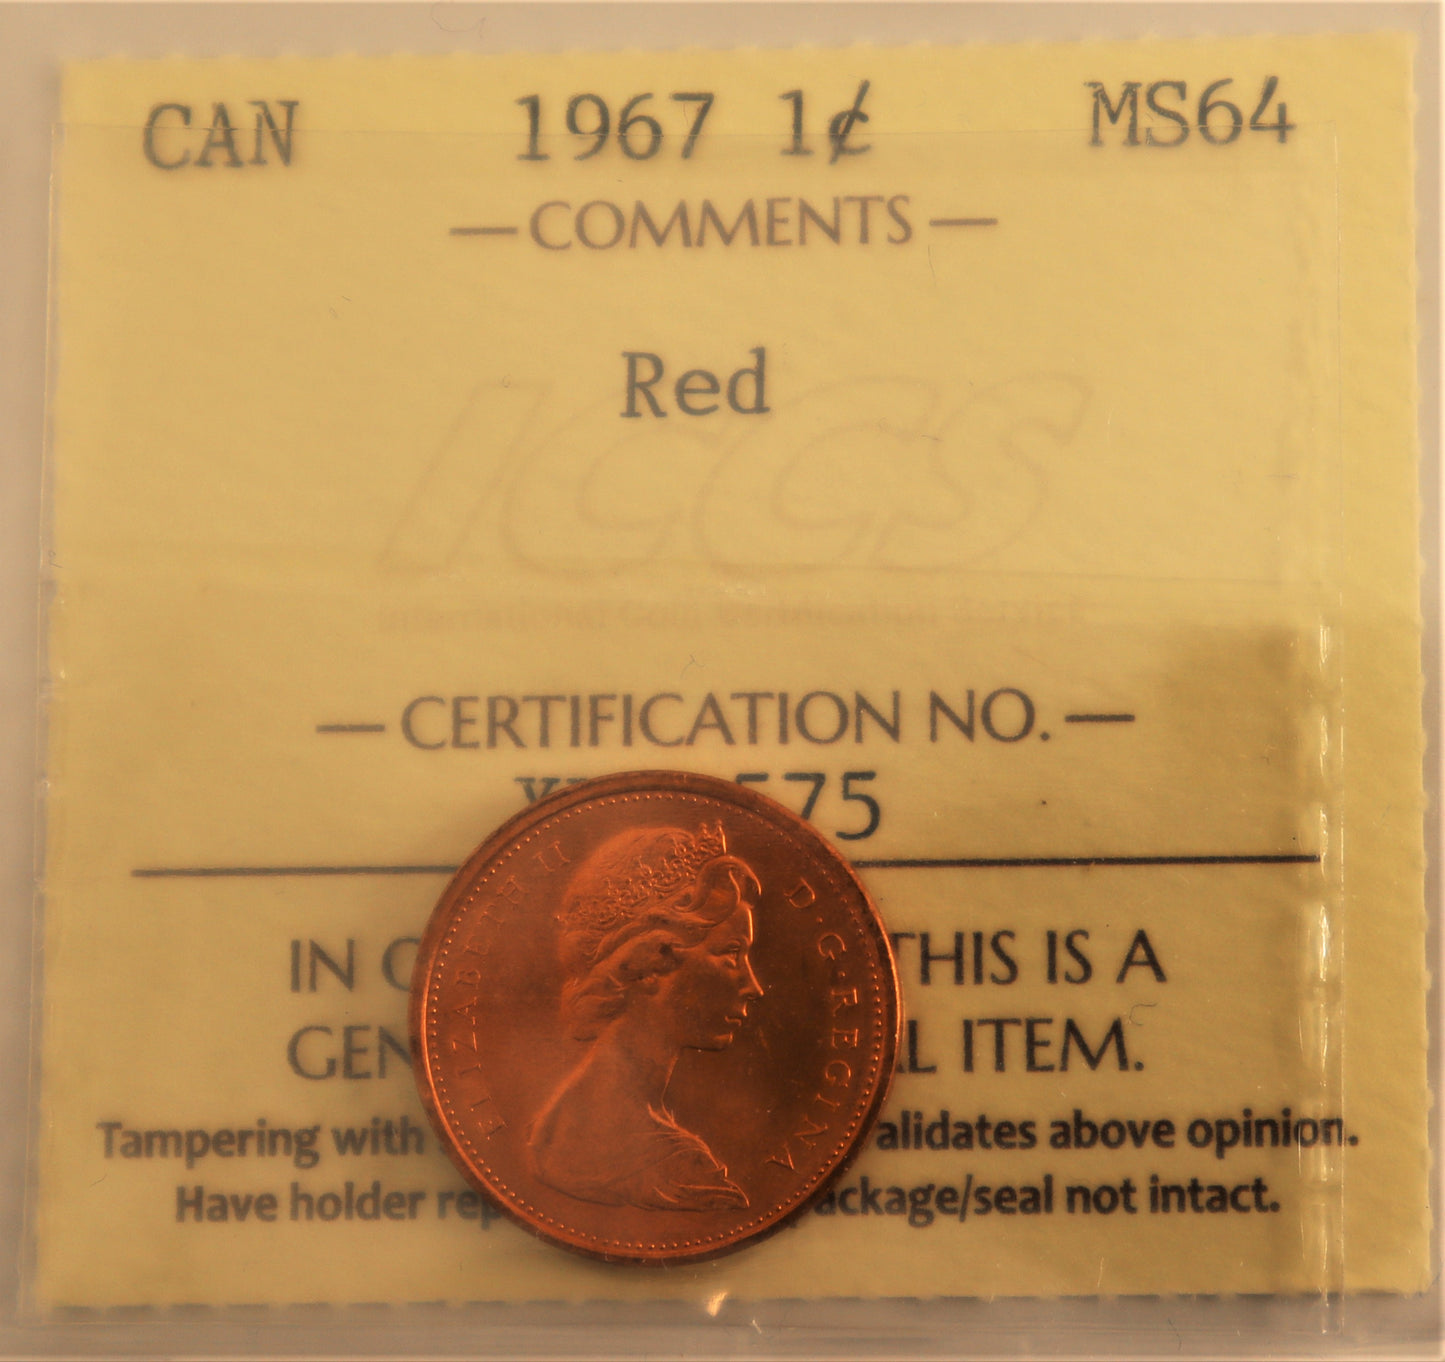 1967 1 Cent ICCS Grade MS-64 Red Cert# XYL 575